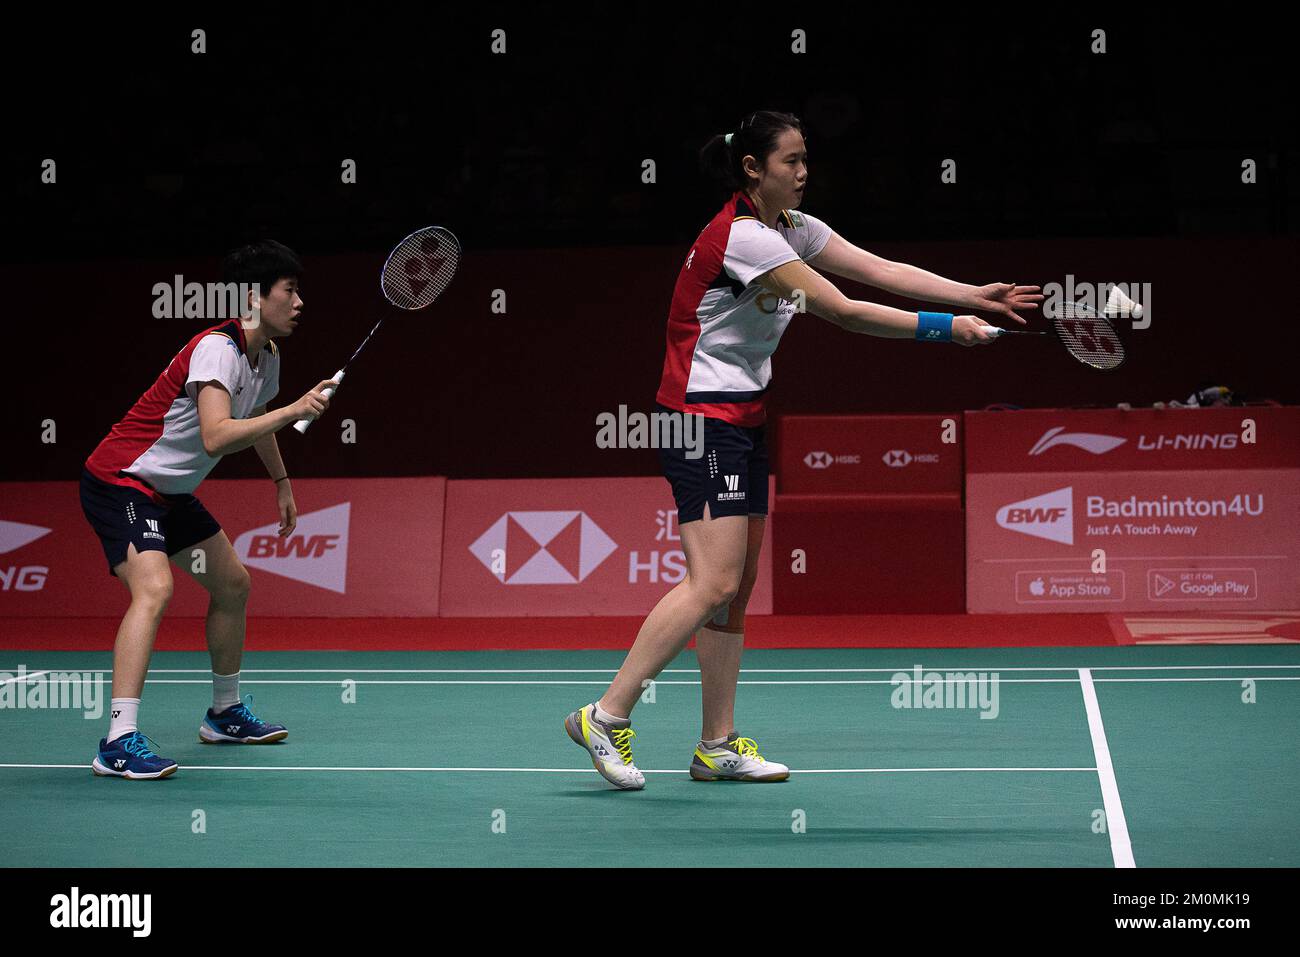 Zhang Shu Xian (L) and Zheng Yu (R) of China seen in action during the Womens double Badminton in the HSBC BTW World Tour Finals 2022 at Nimibutr Stadium in Bangkok.The result